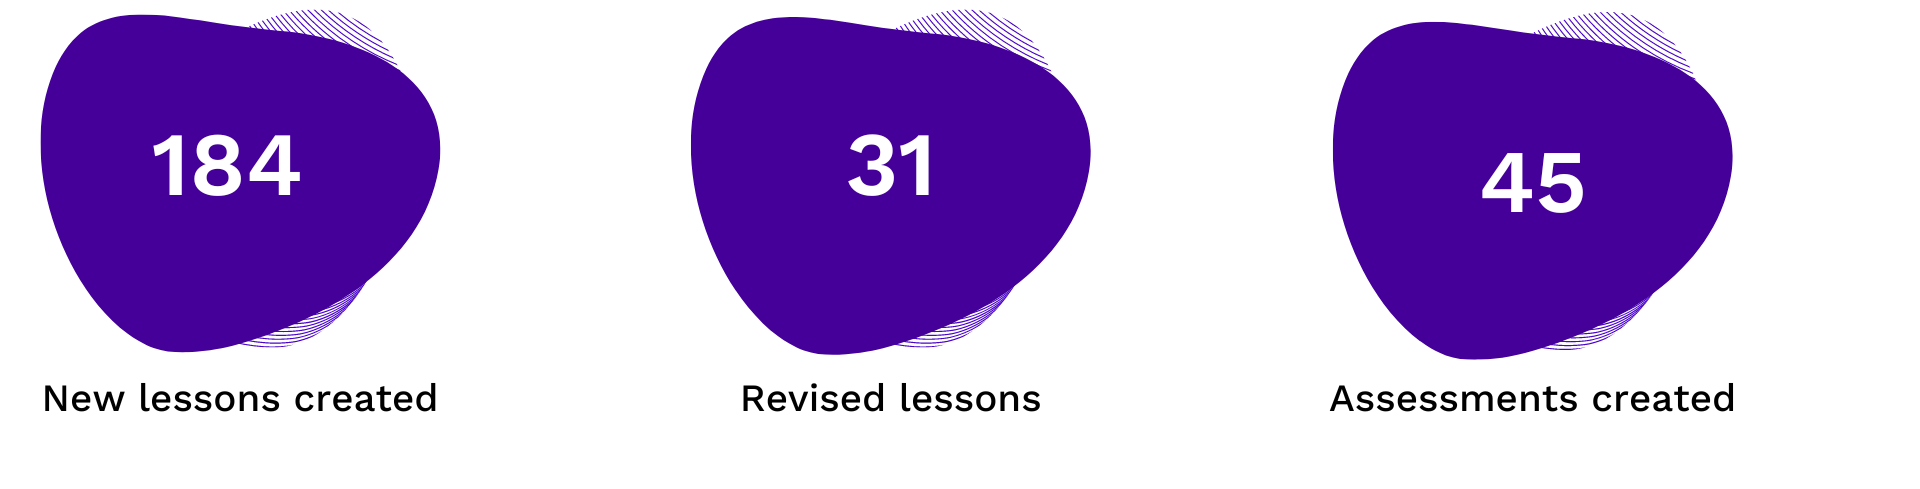 number-of-lessons-created-revised-and-assessments-created-with-digital-learning-platform